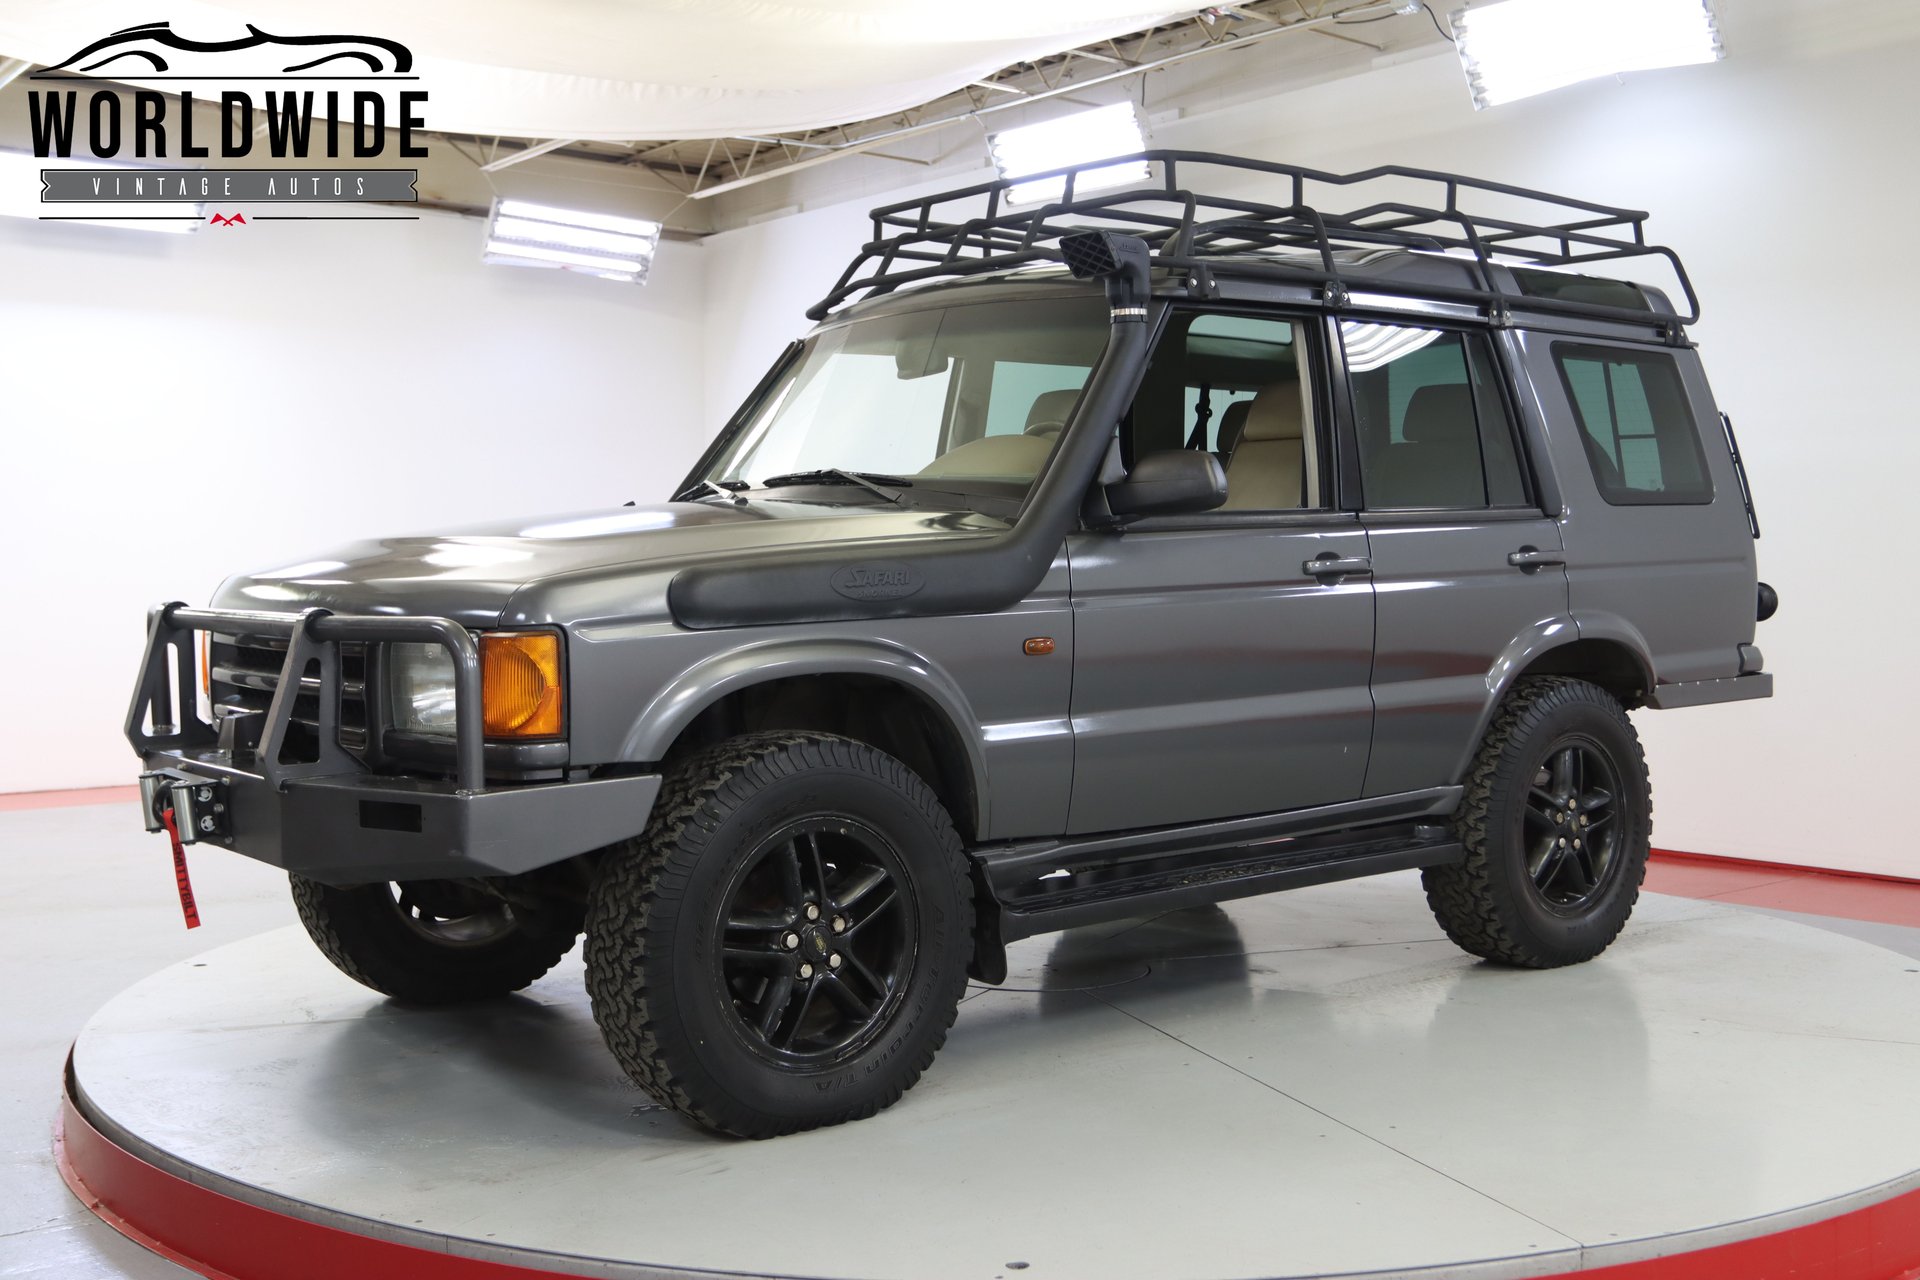 2001 Land Rover Discovery | Worldwide Vintage Autos